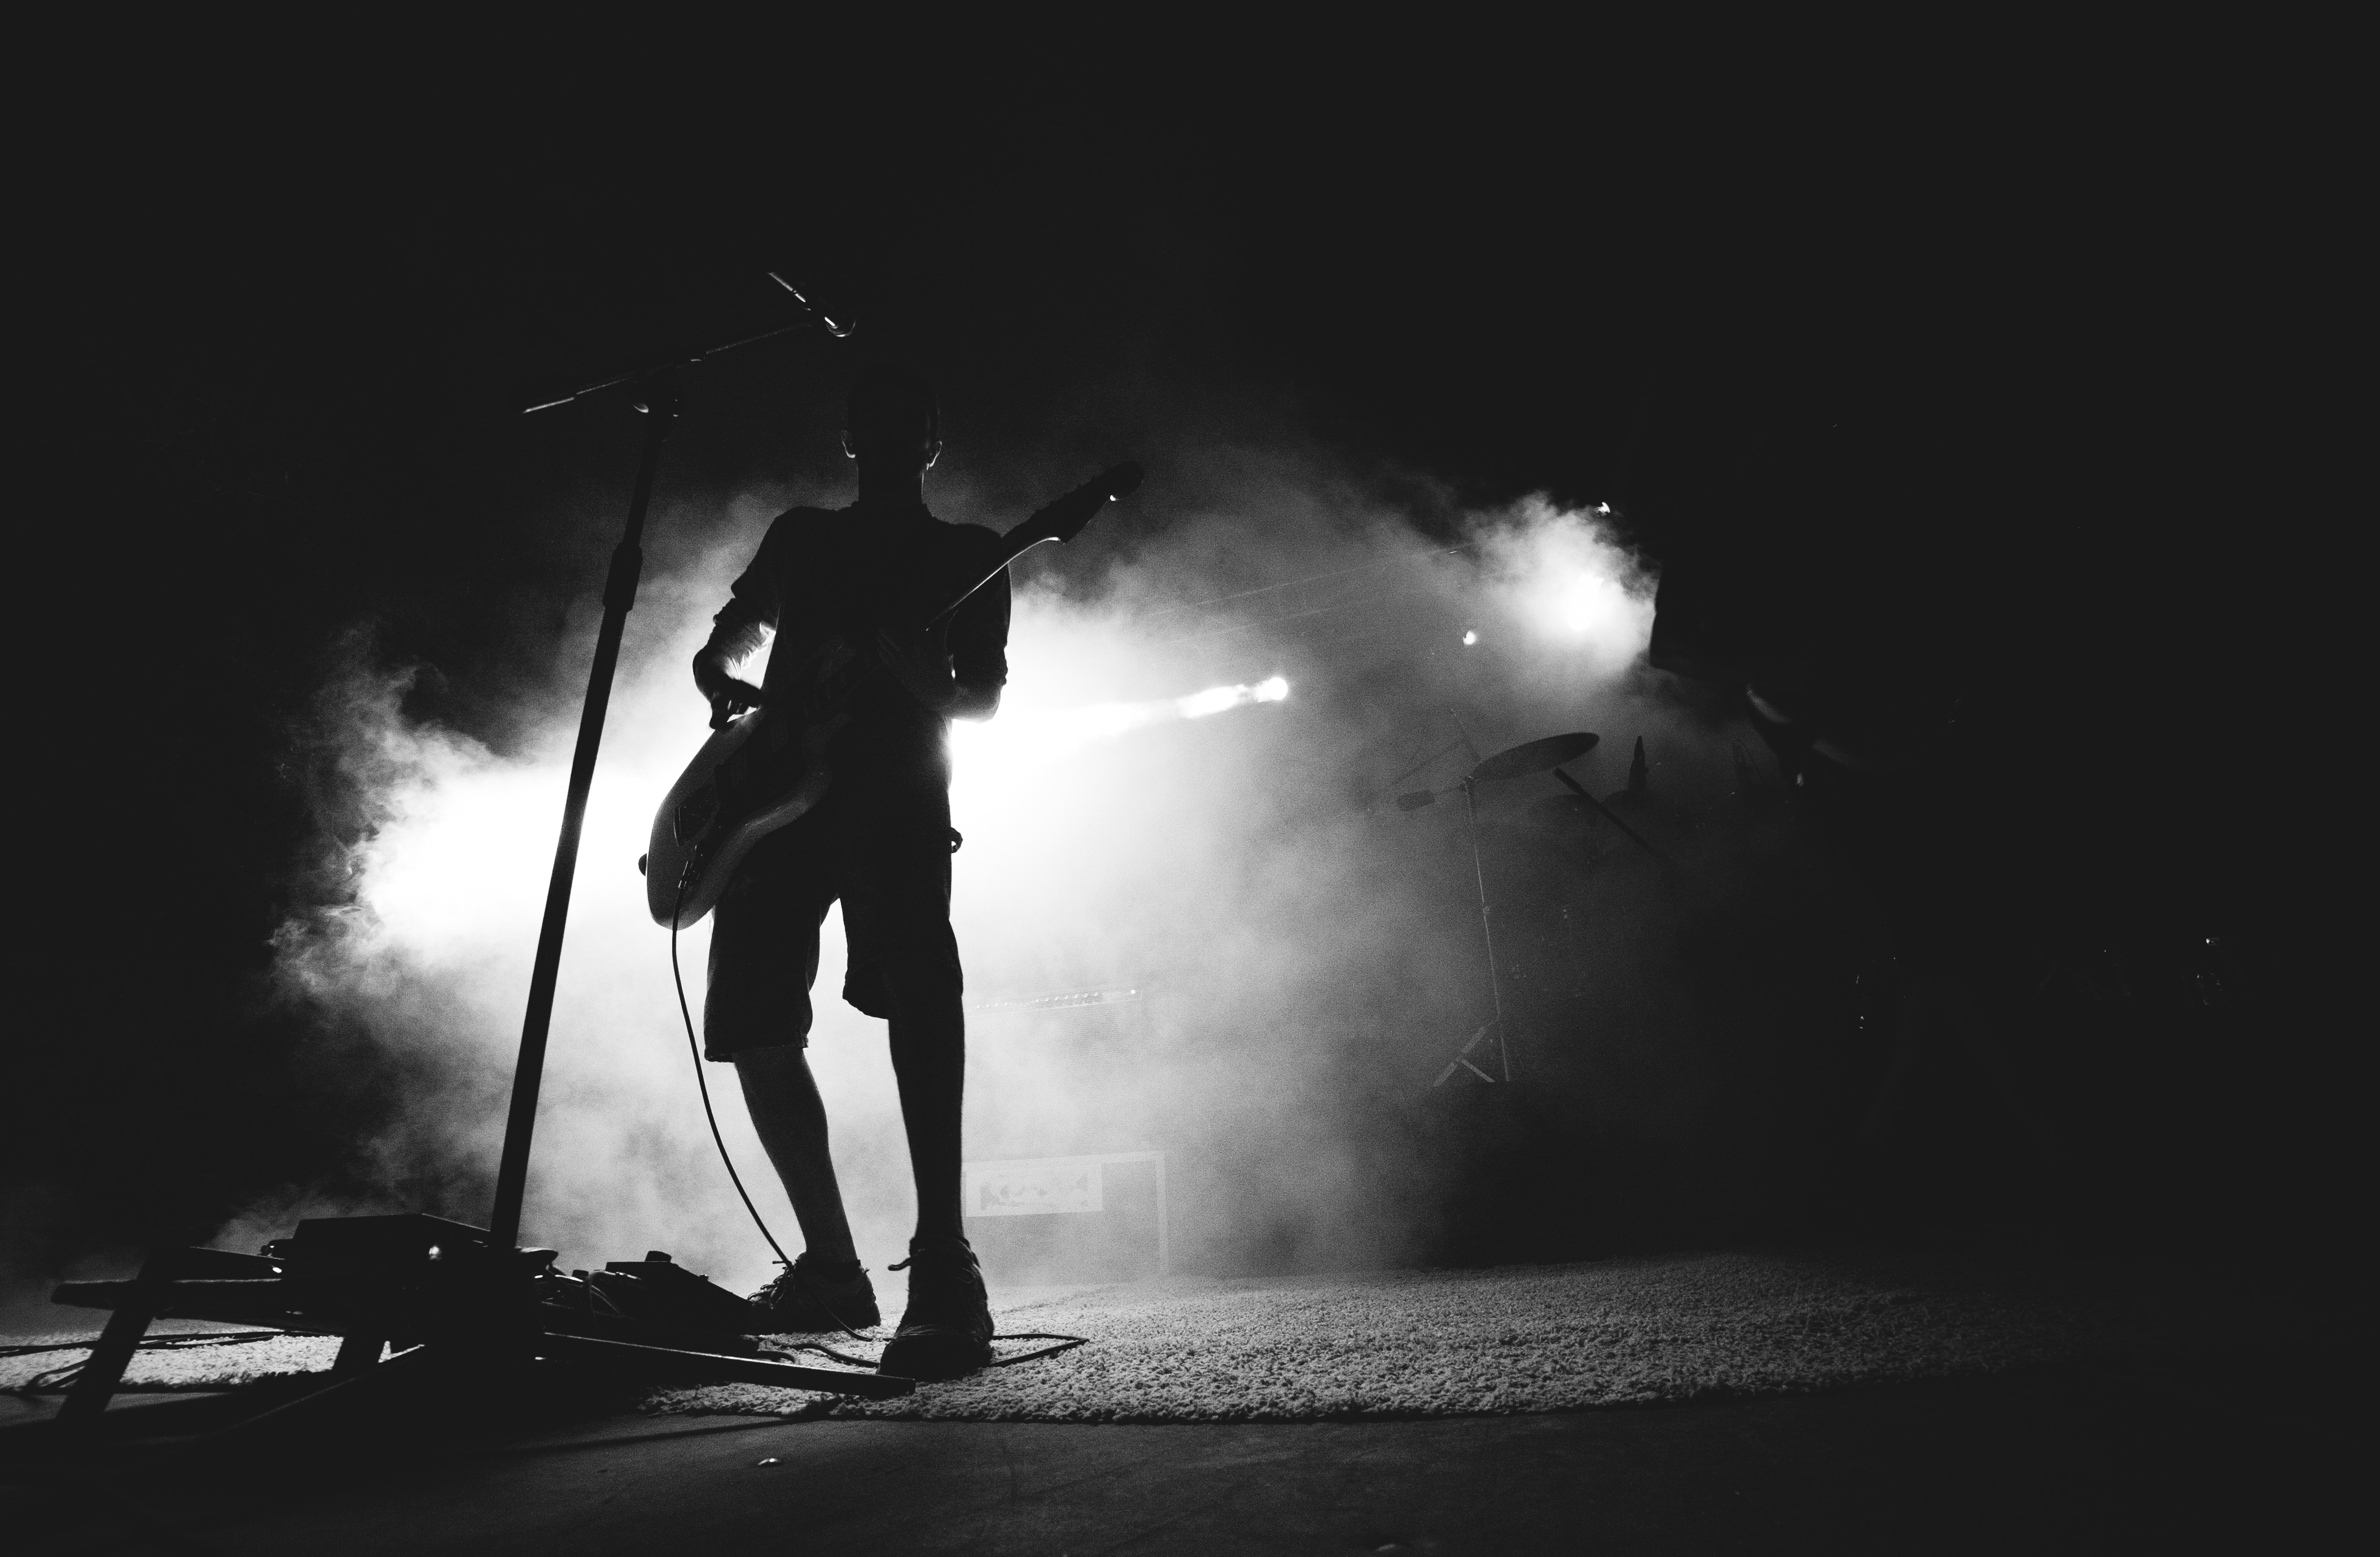 guitarist, guitar player, smoke, black, musician, black and white, concert, microphone, performance